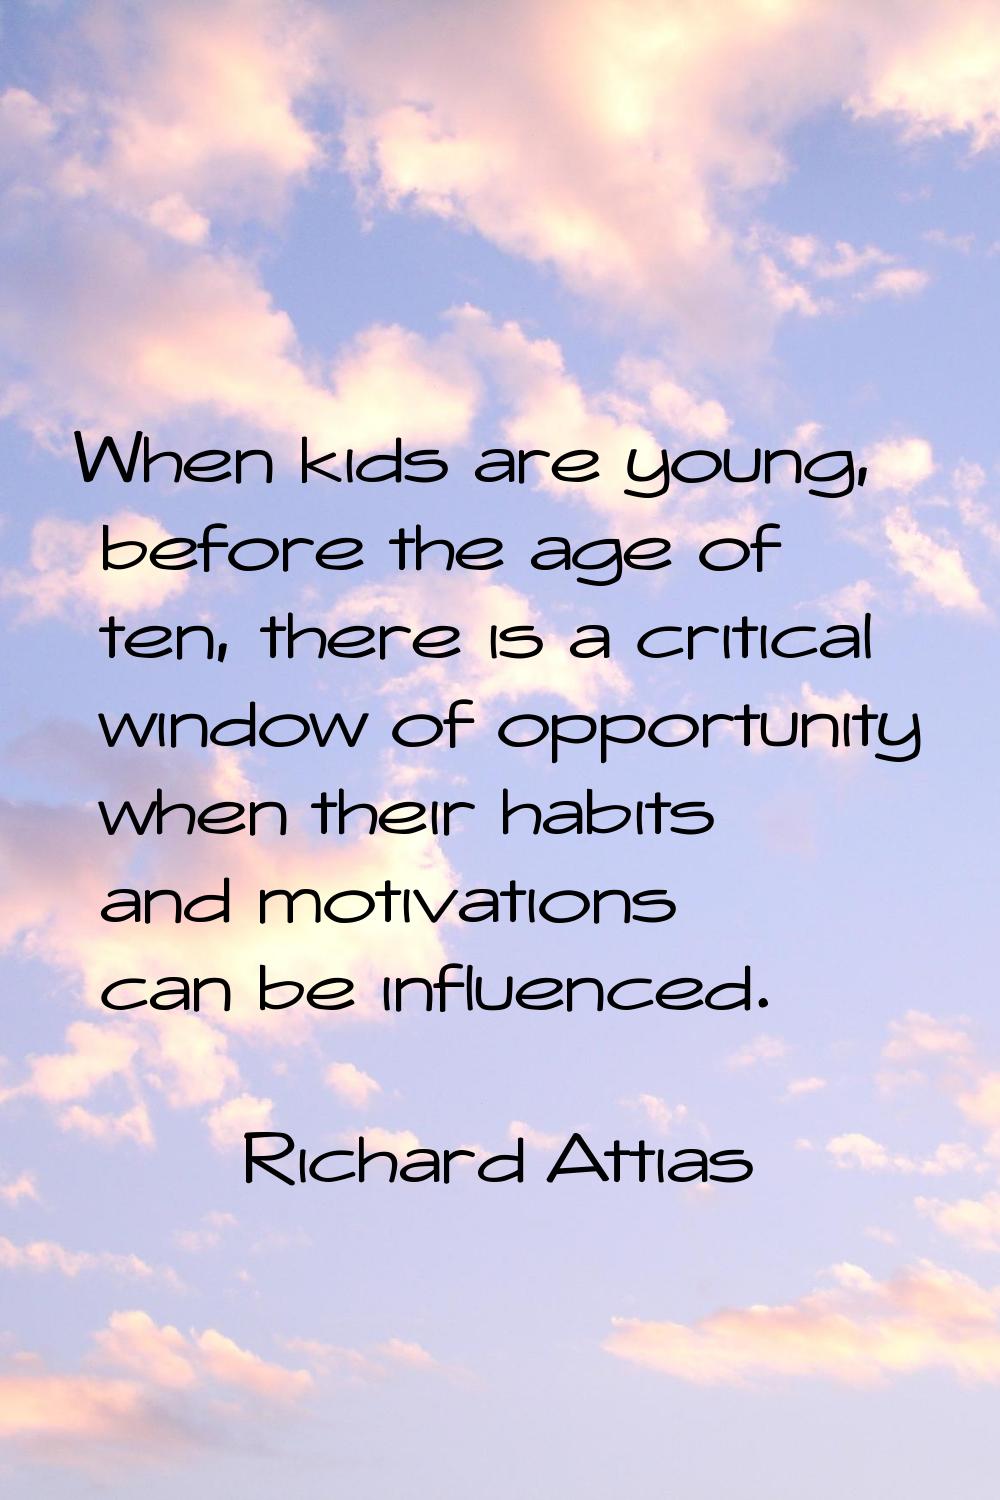 When kids are young, before the age of ten, there is a critical window of opportunity when their ha